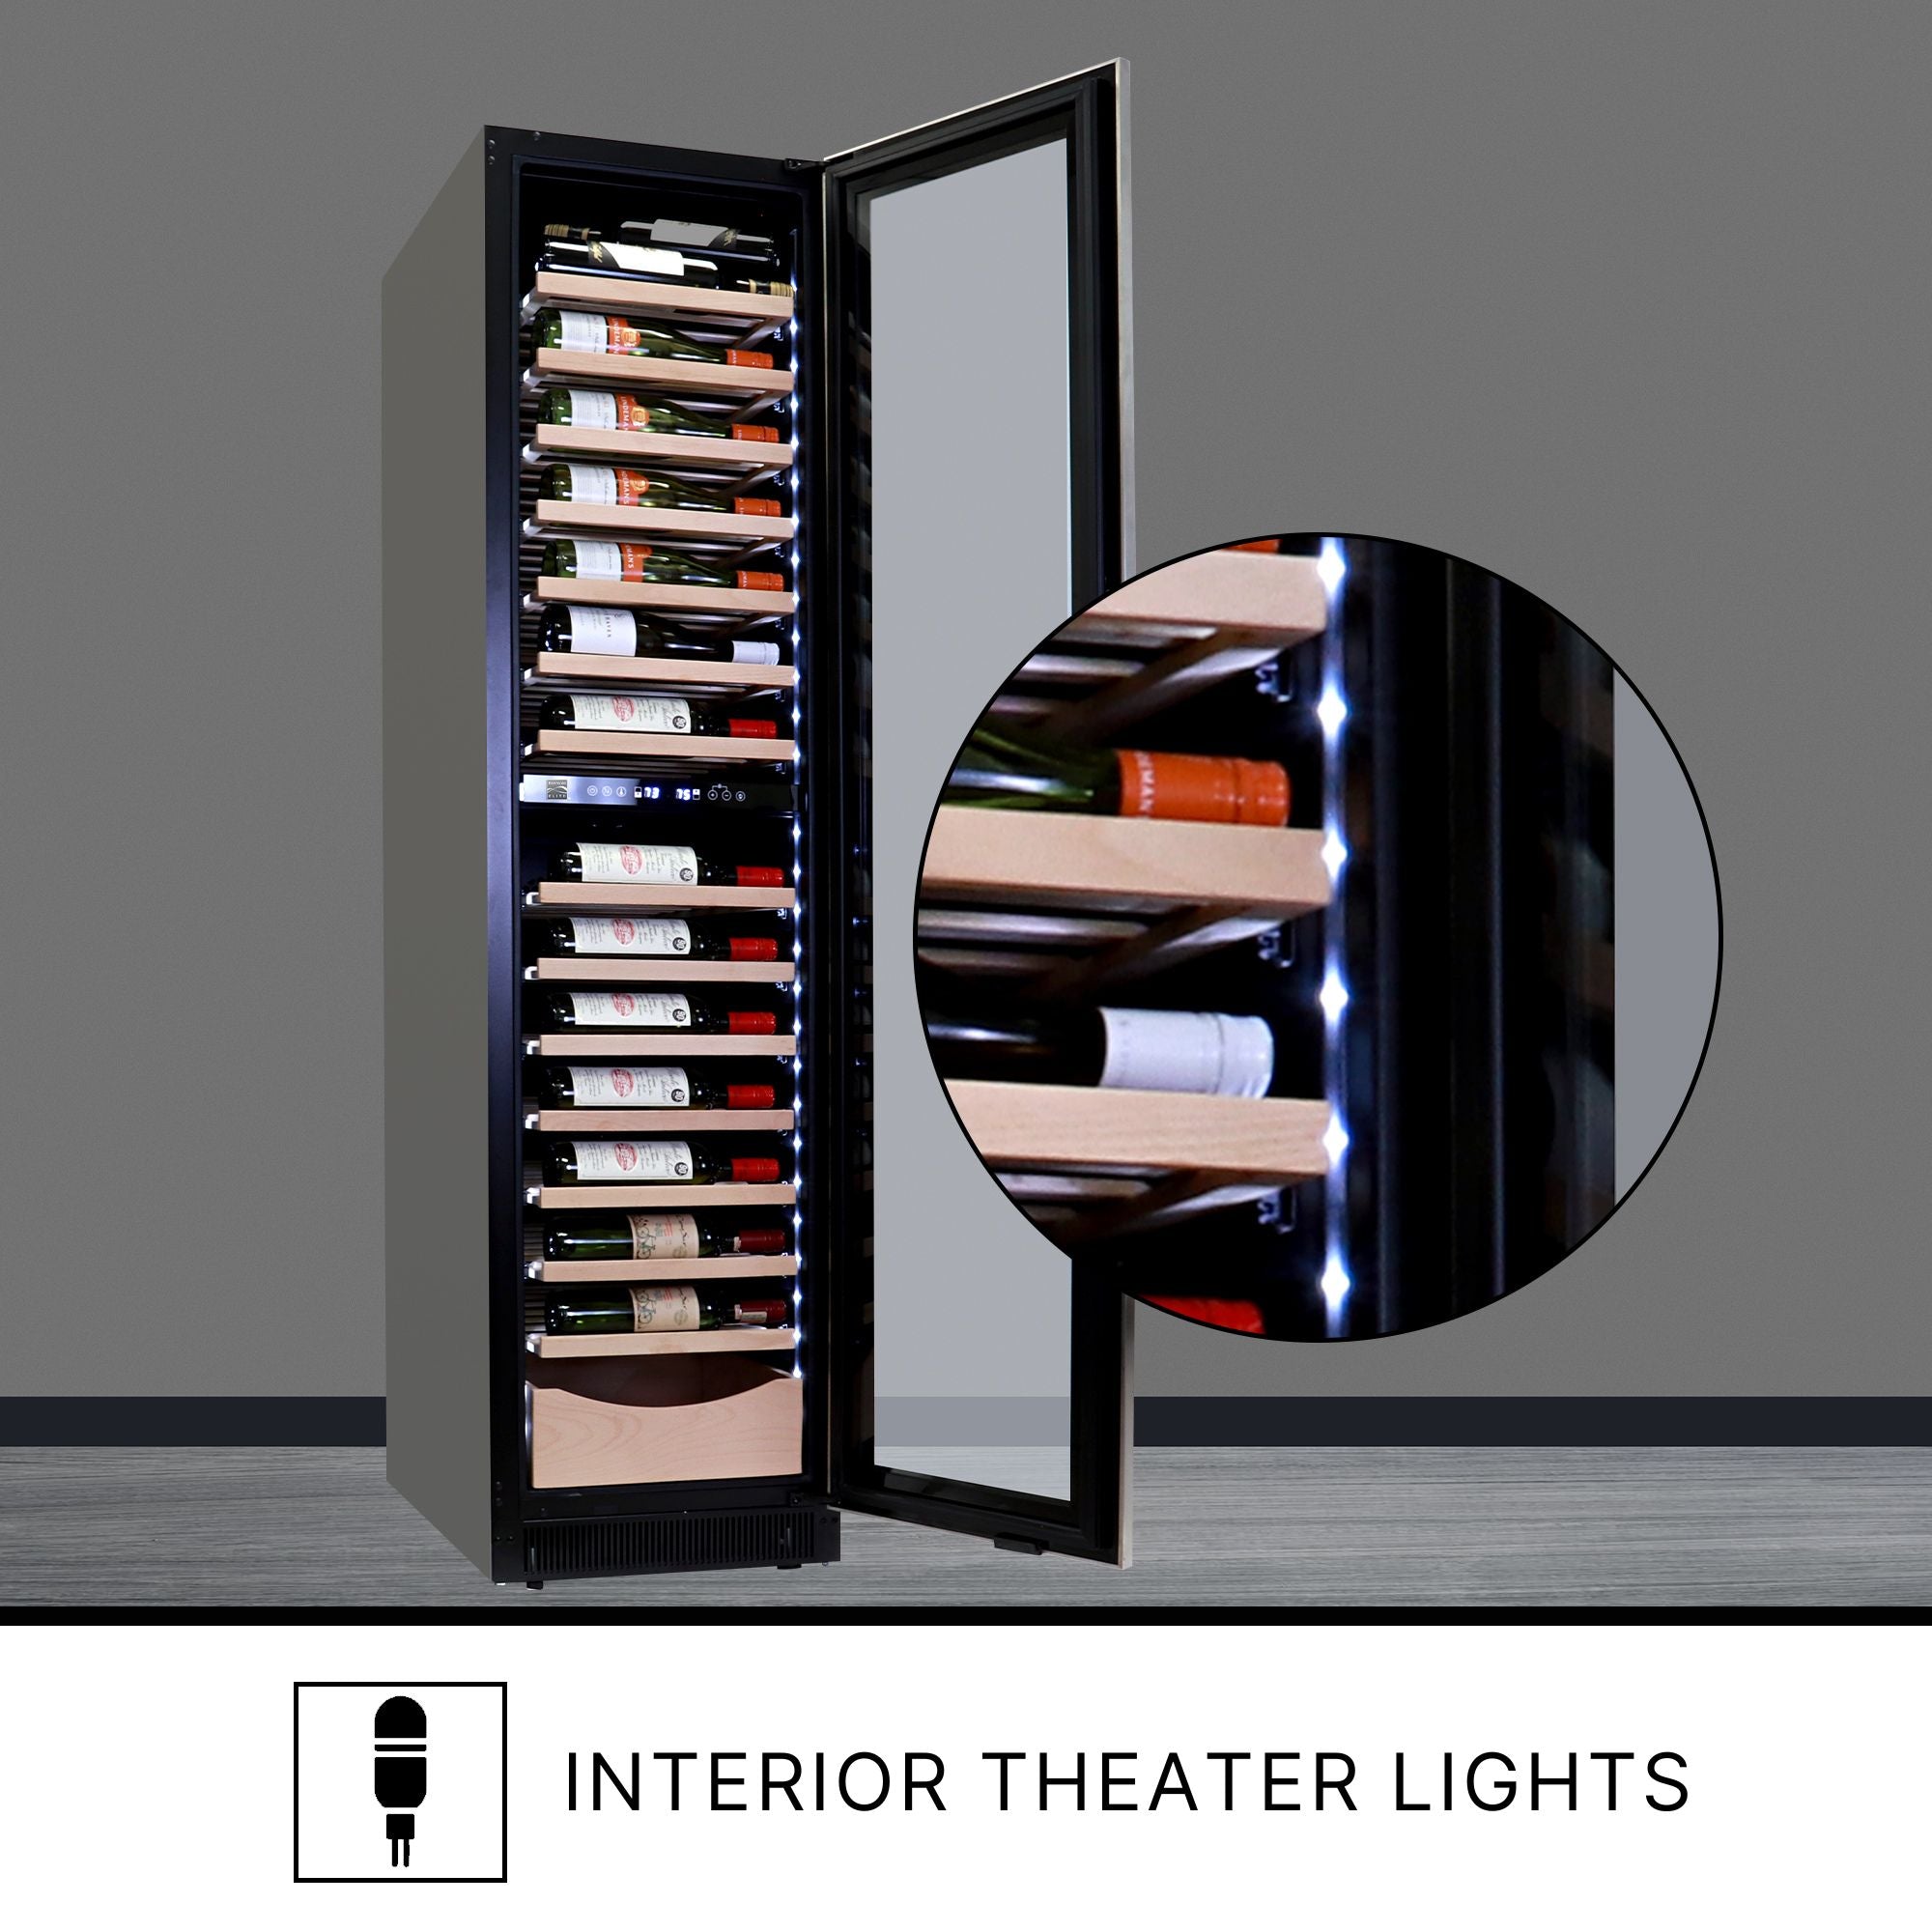 Kenmore Elite 111 bottle dual zone compressor wine chiller, open and filled with wine bottles, with an inset closeup showing the full-surround LED display lighting. Text below reads, "Interior theater lights"